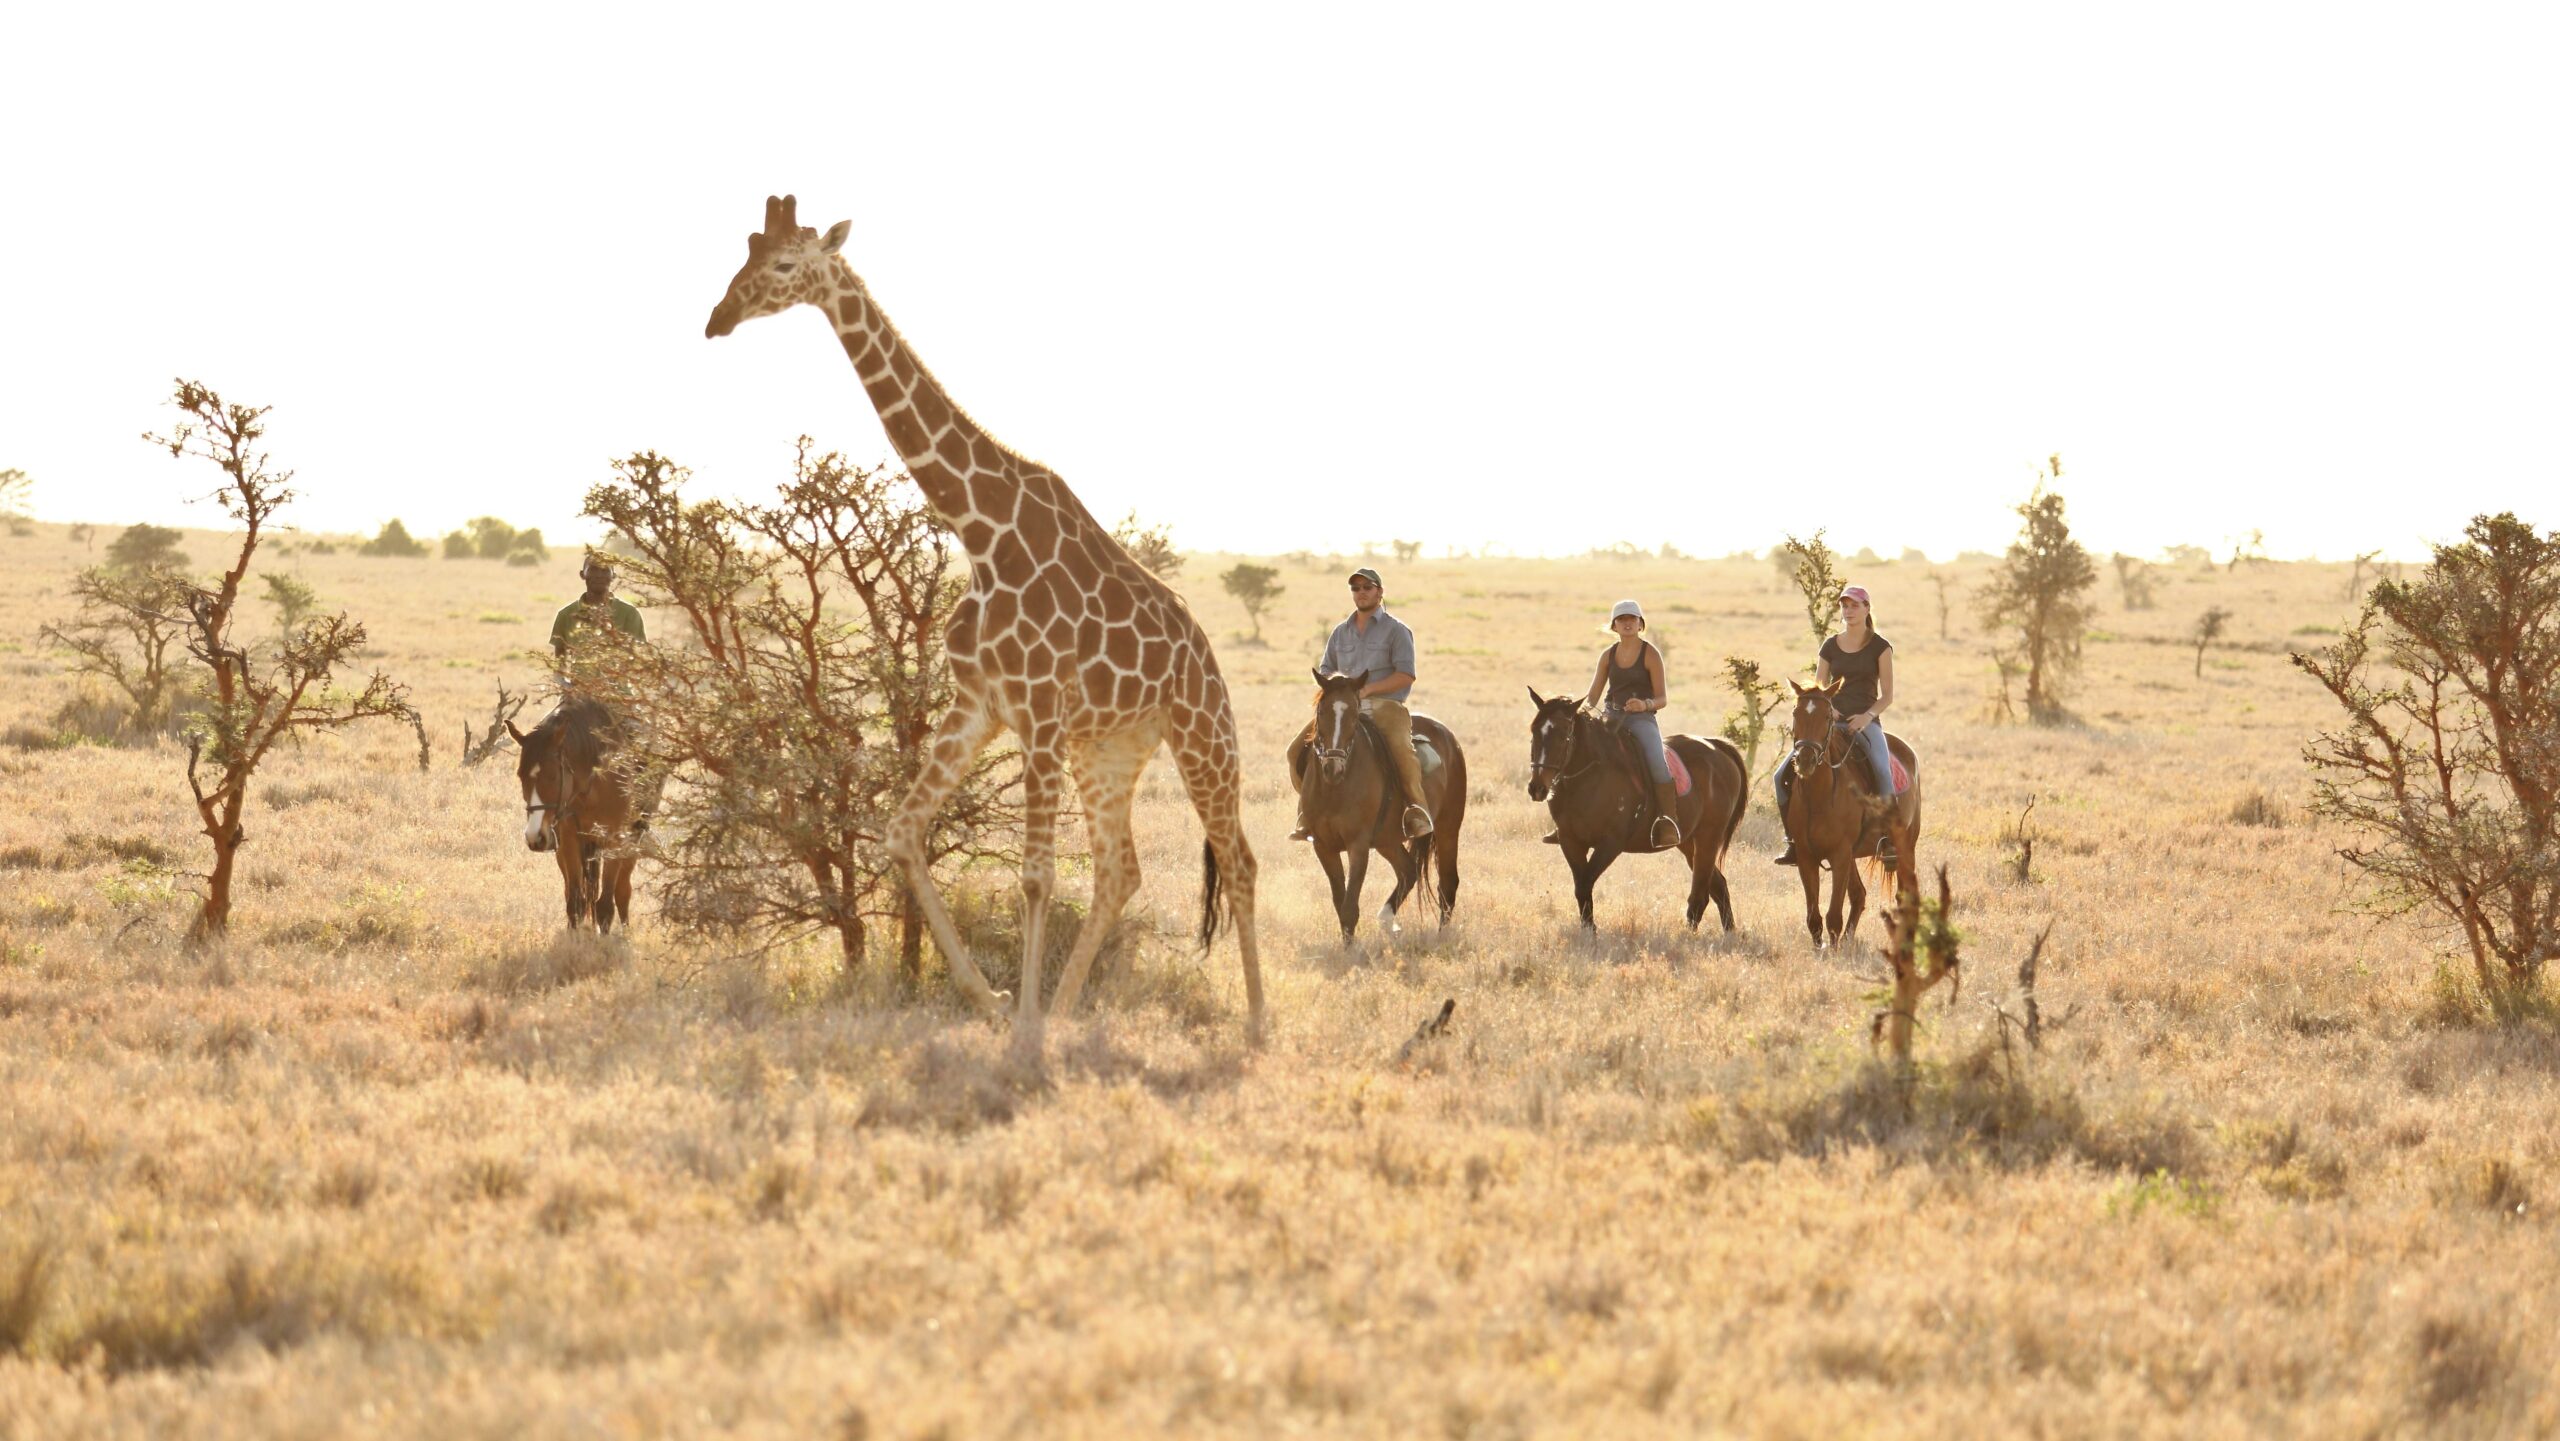 four riders traveling on horseback stop to look at a giraffe walking very close to them to reach a tree with leaves